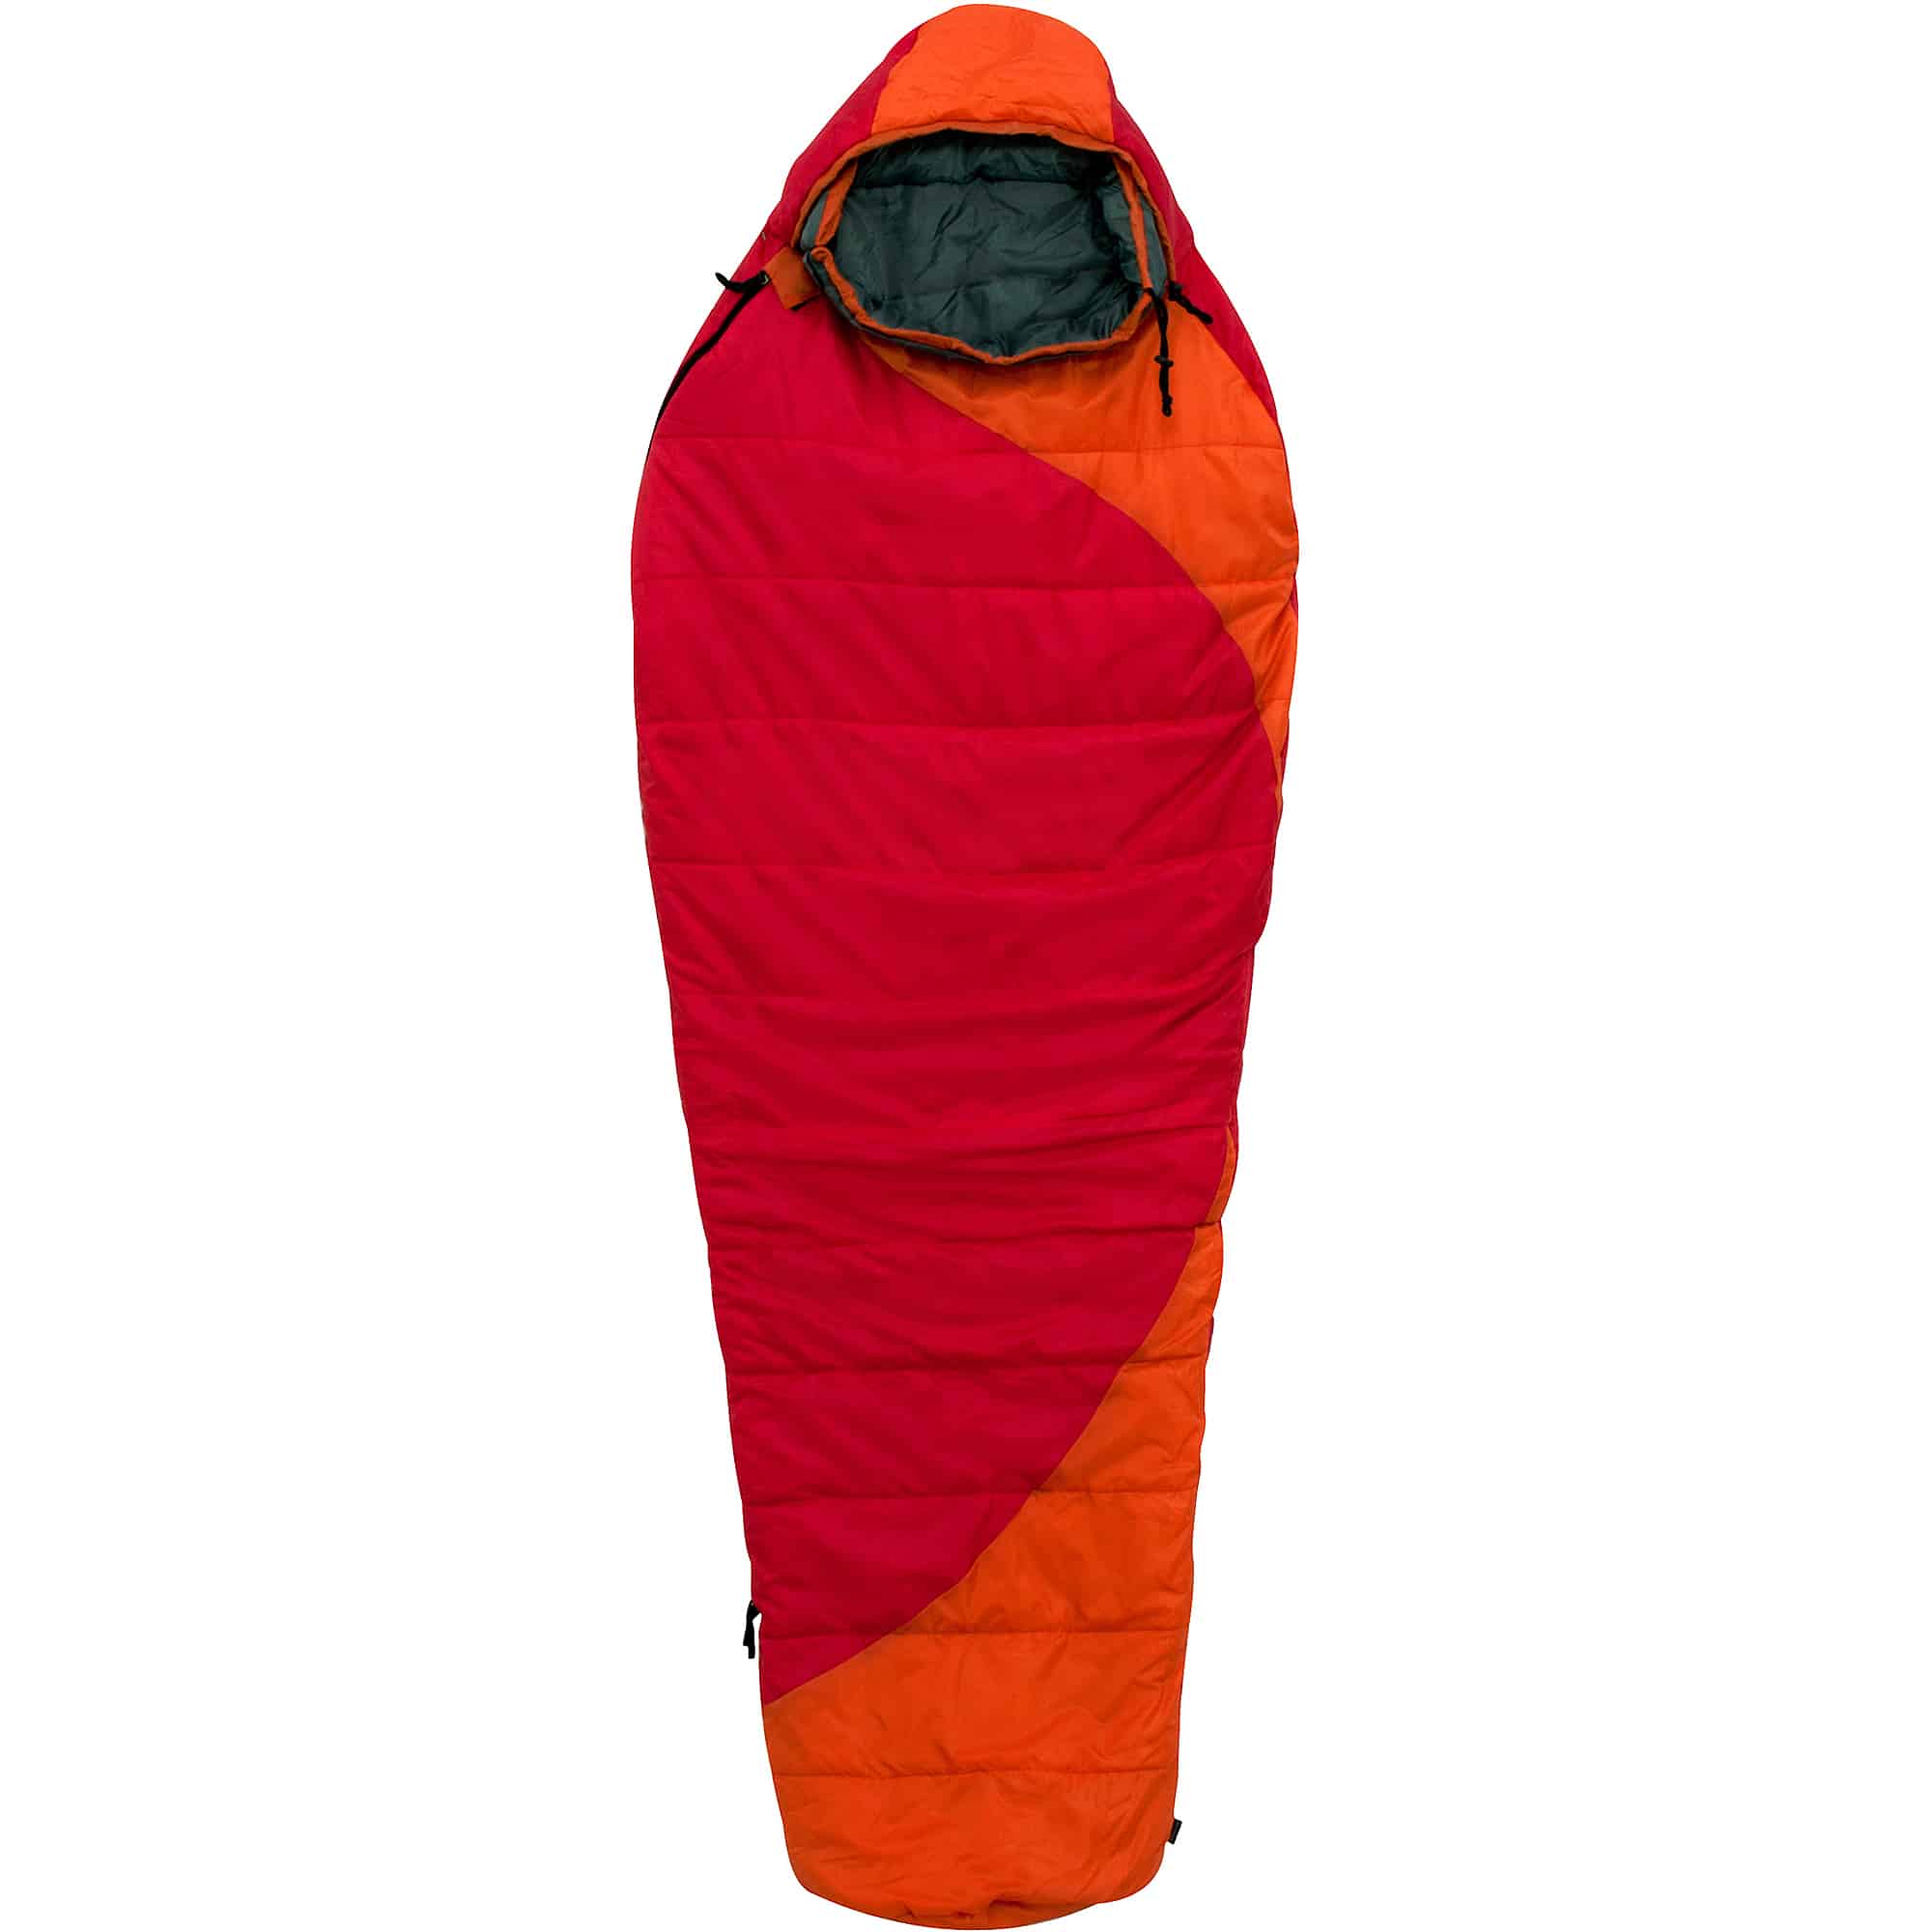 Top 14 Best Selling Sleeping Bags in India (March 2021)